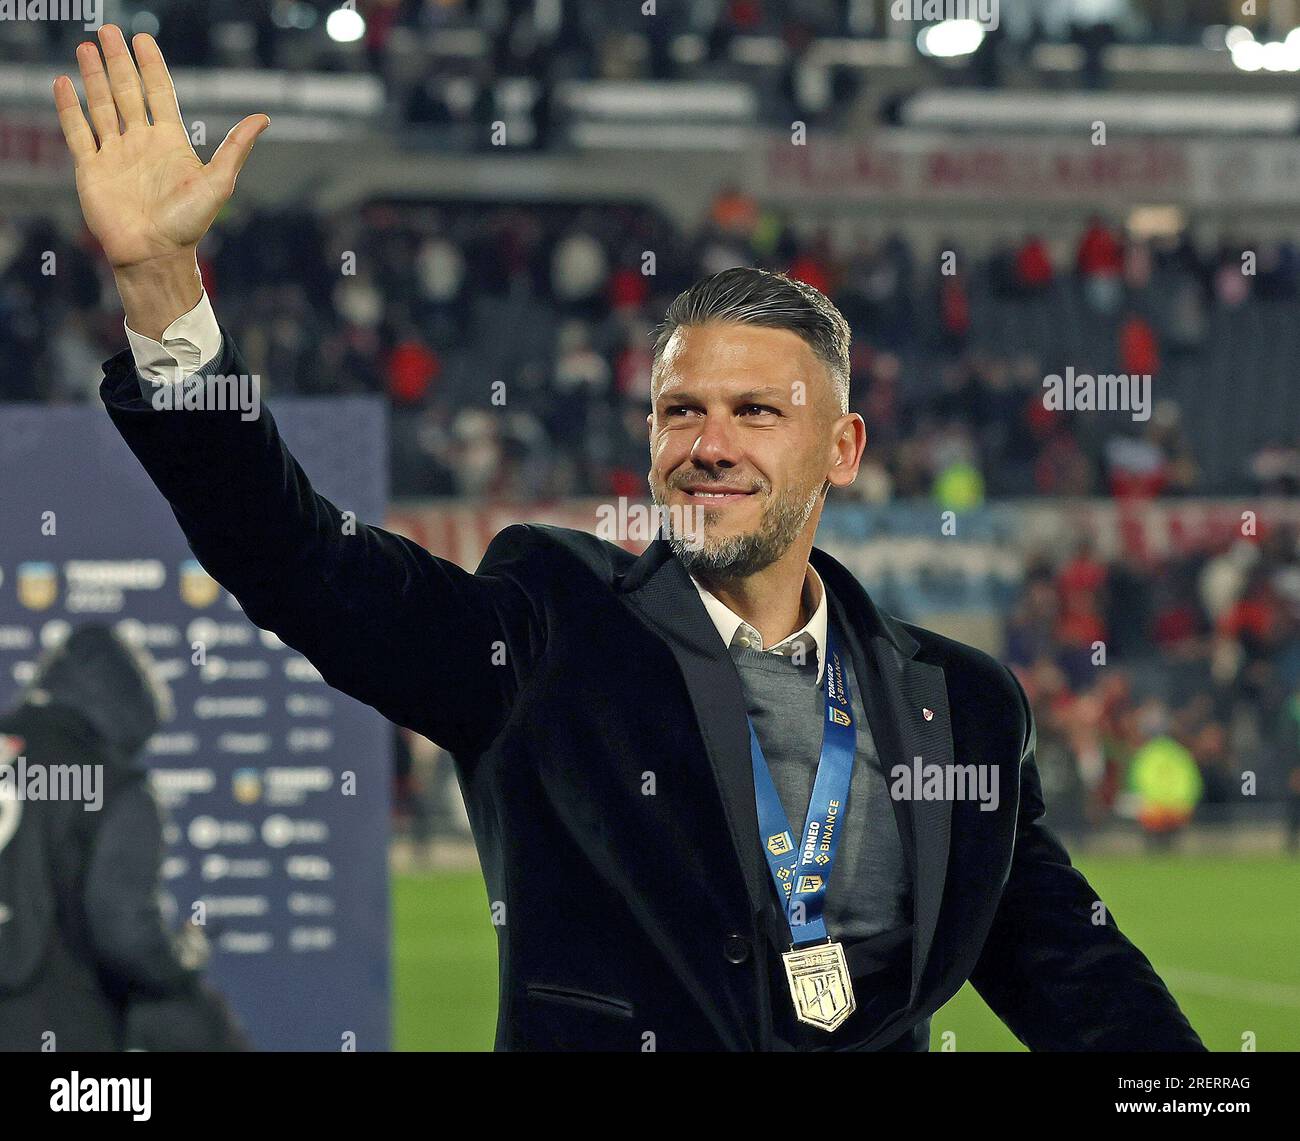 River Plate's team coach Martin Demichelis waves during the celebration after defeating Racing Club by 2-1 and become champion of the Argentine Professional Football League Tournament 2023 at El Monumental stadium, in Buenos Aires, on July 28, 2023.  (Photo by Alejandro Pagni / PHOTOxPHOTO) Stock Photo